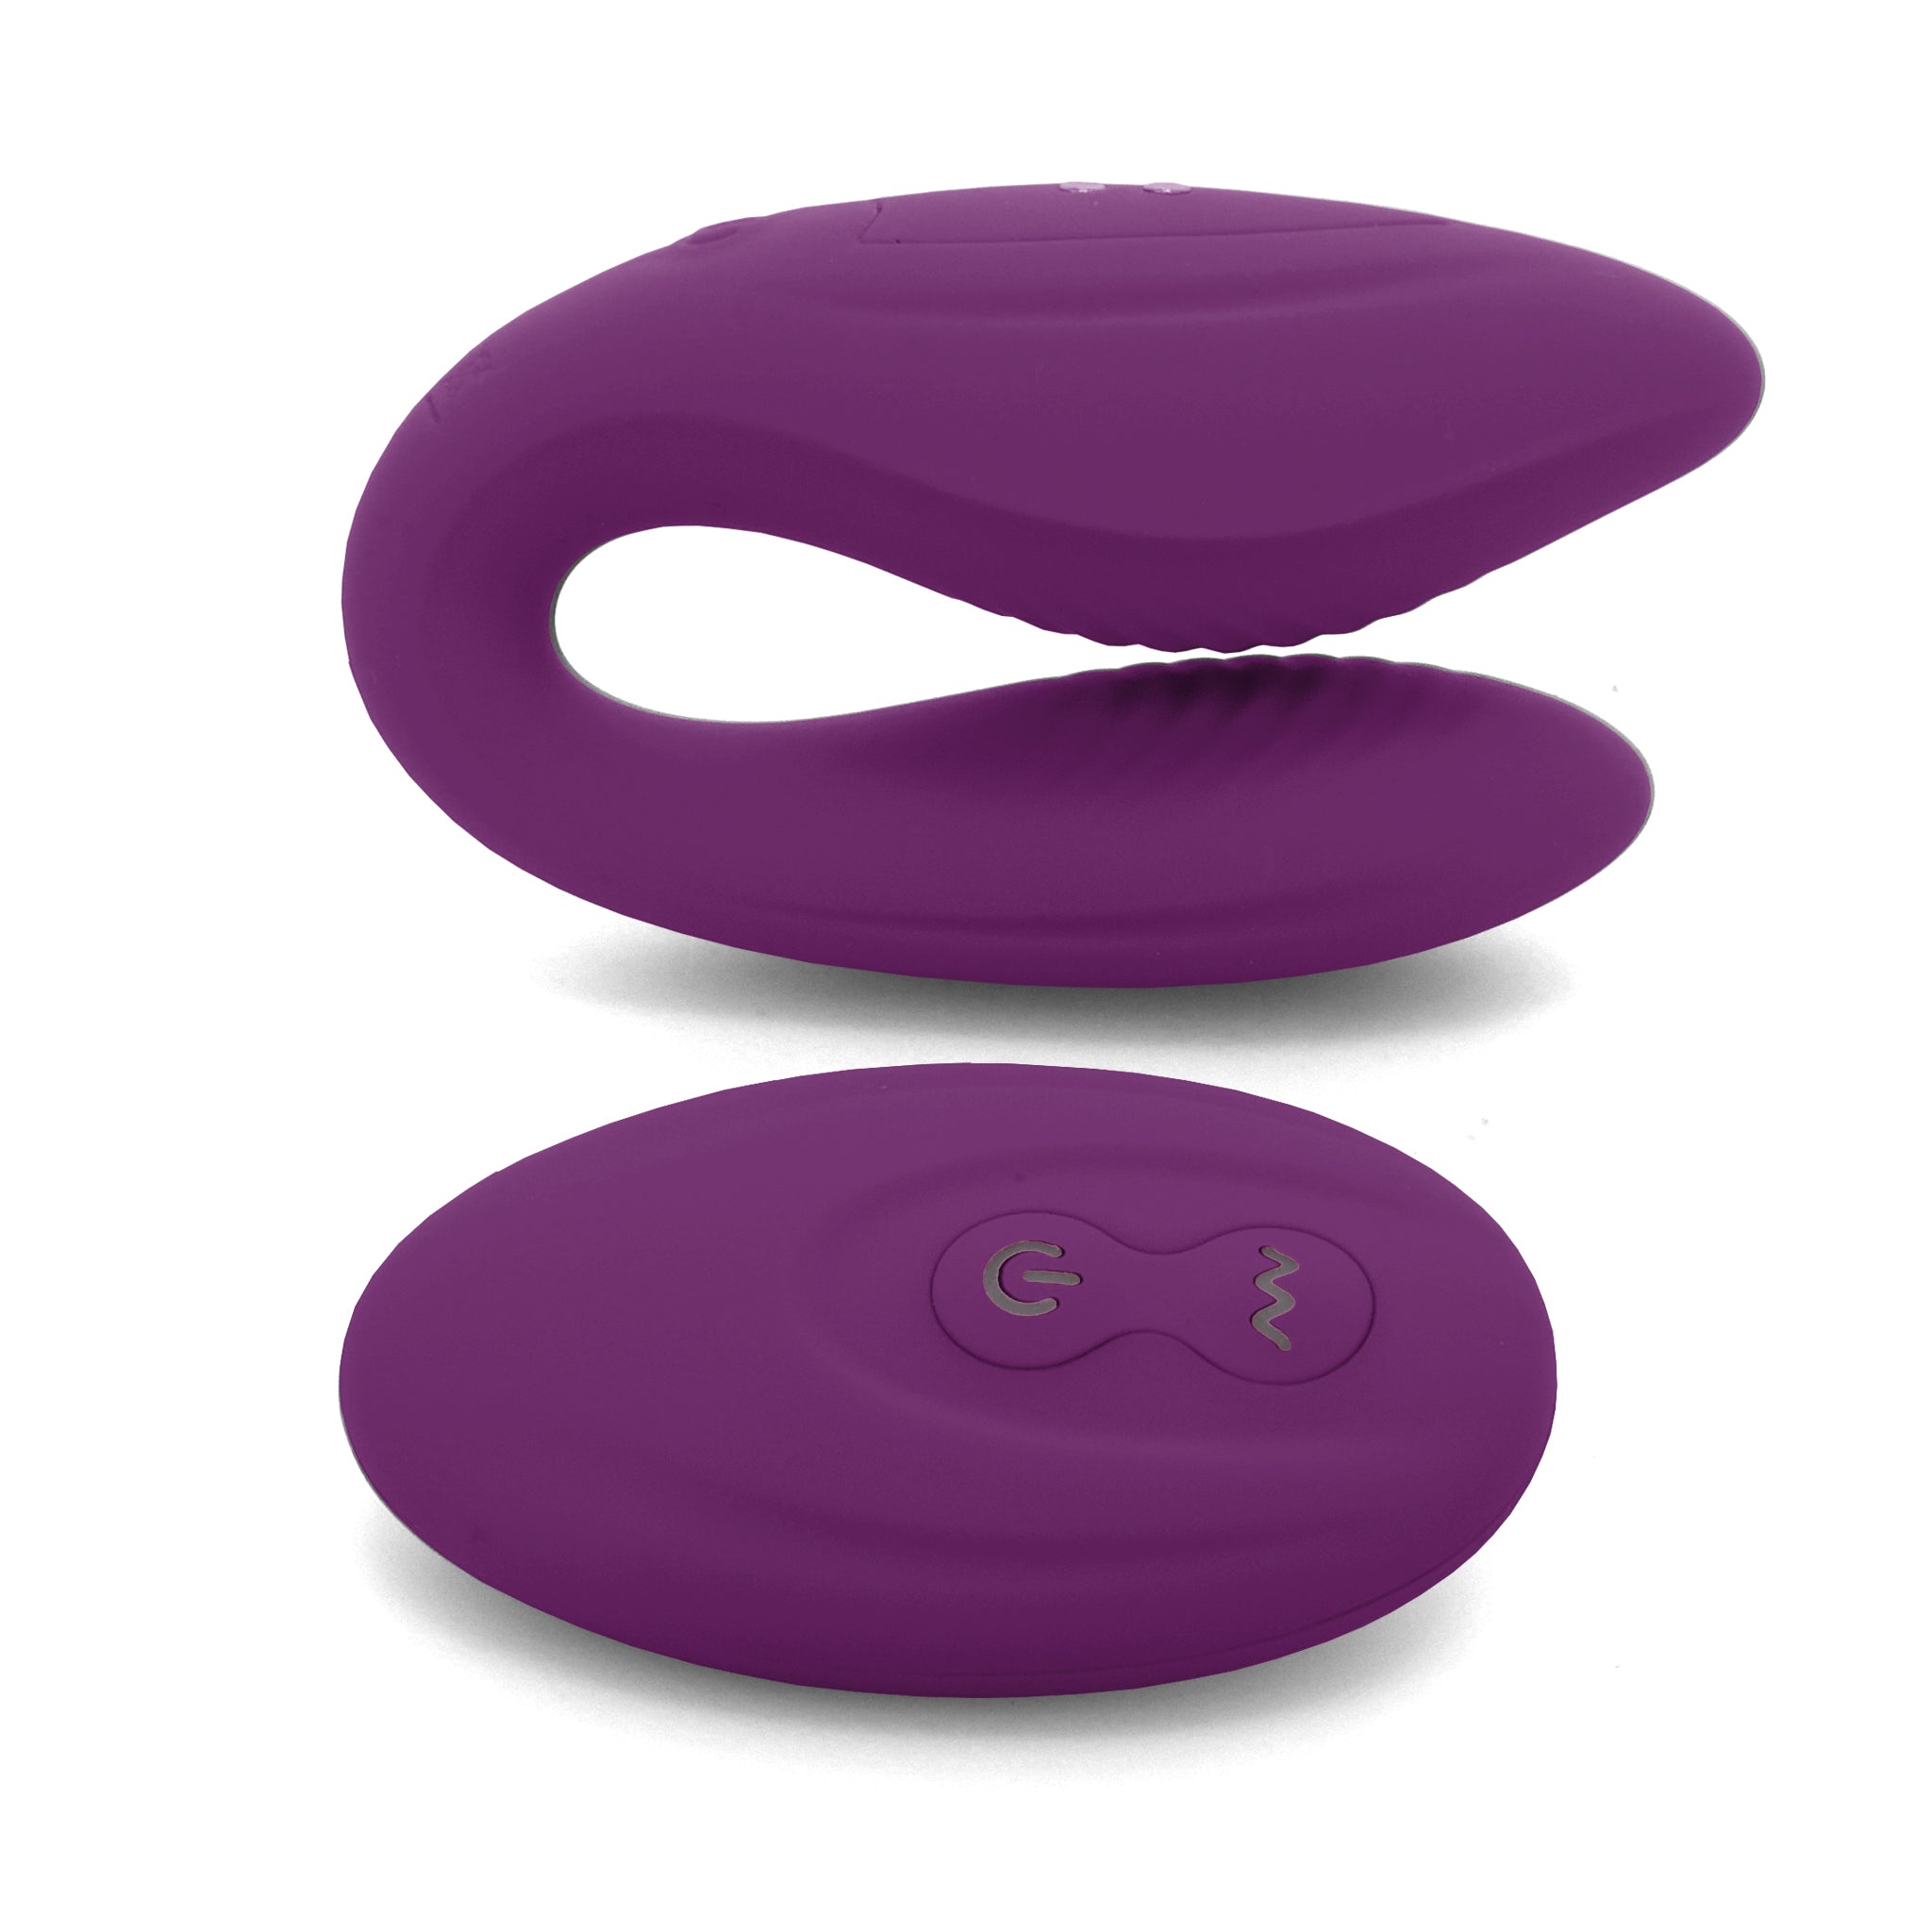 Wearable G-Spot and Clitoral Vibrator with Remote Control - The Cumulus